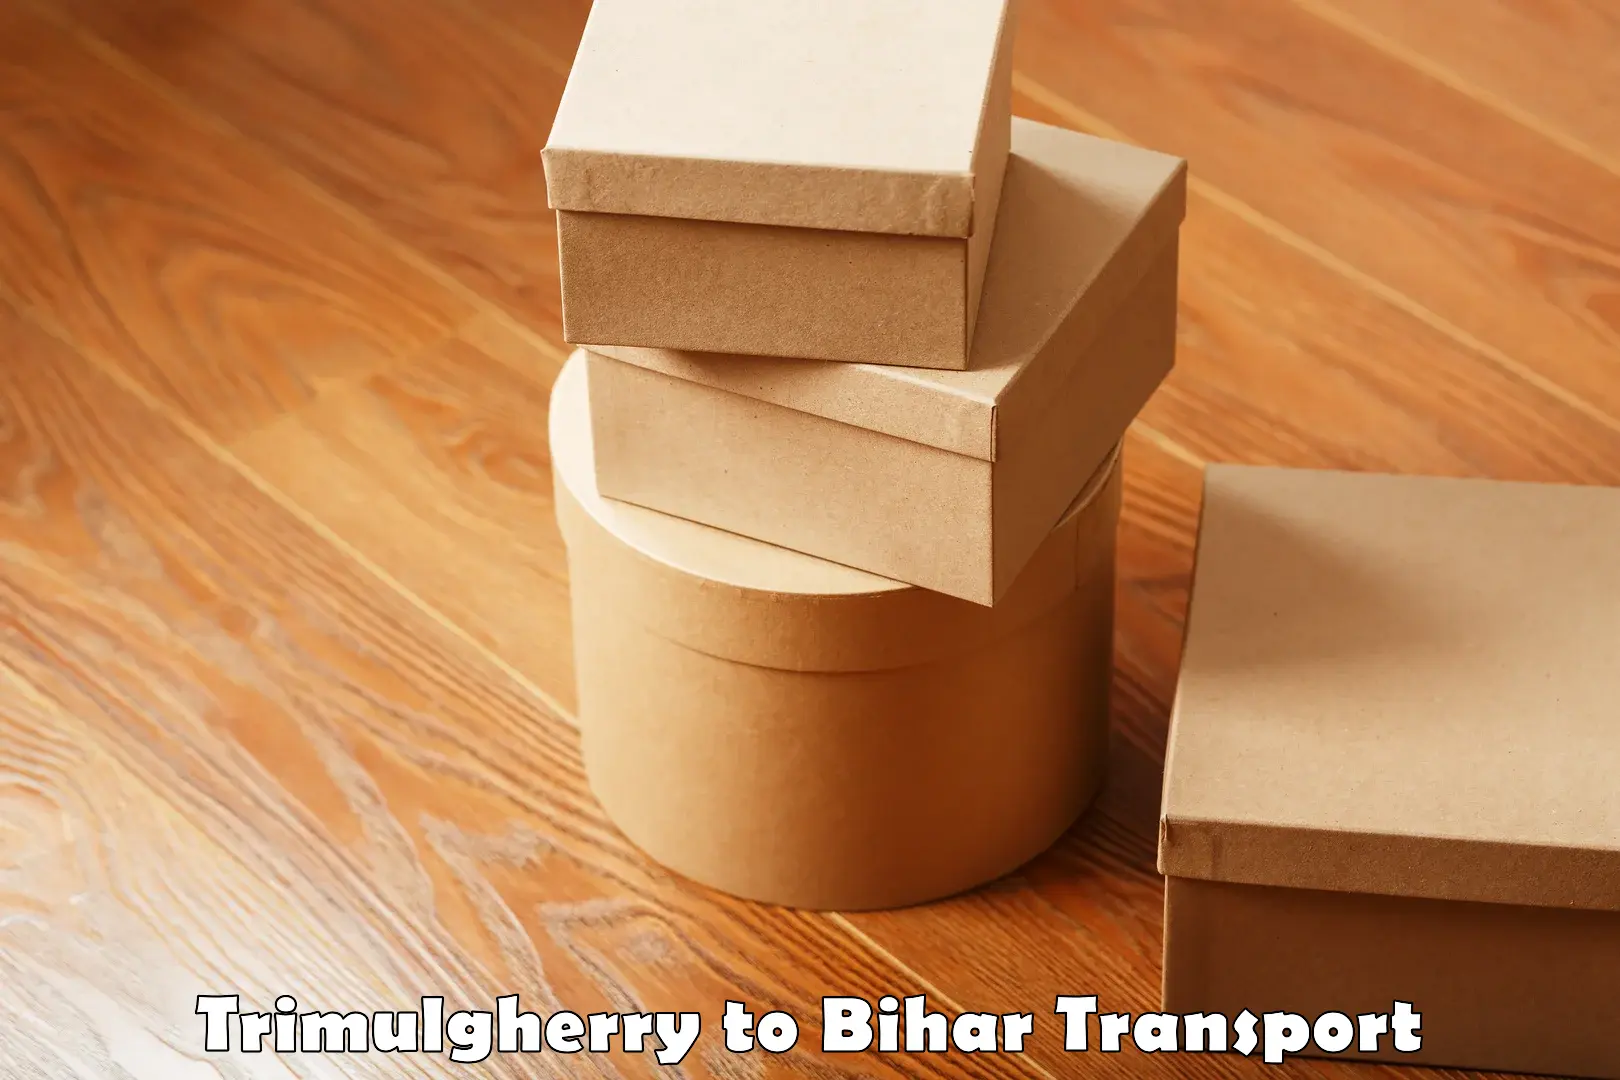 Shipping partner Trimulgherry to Chainpur